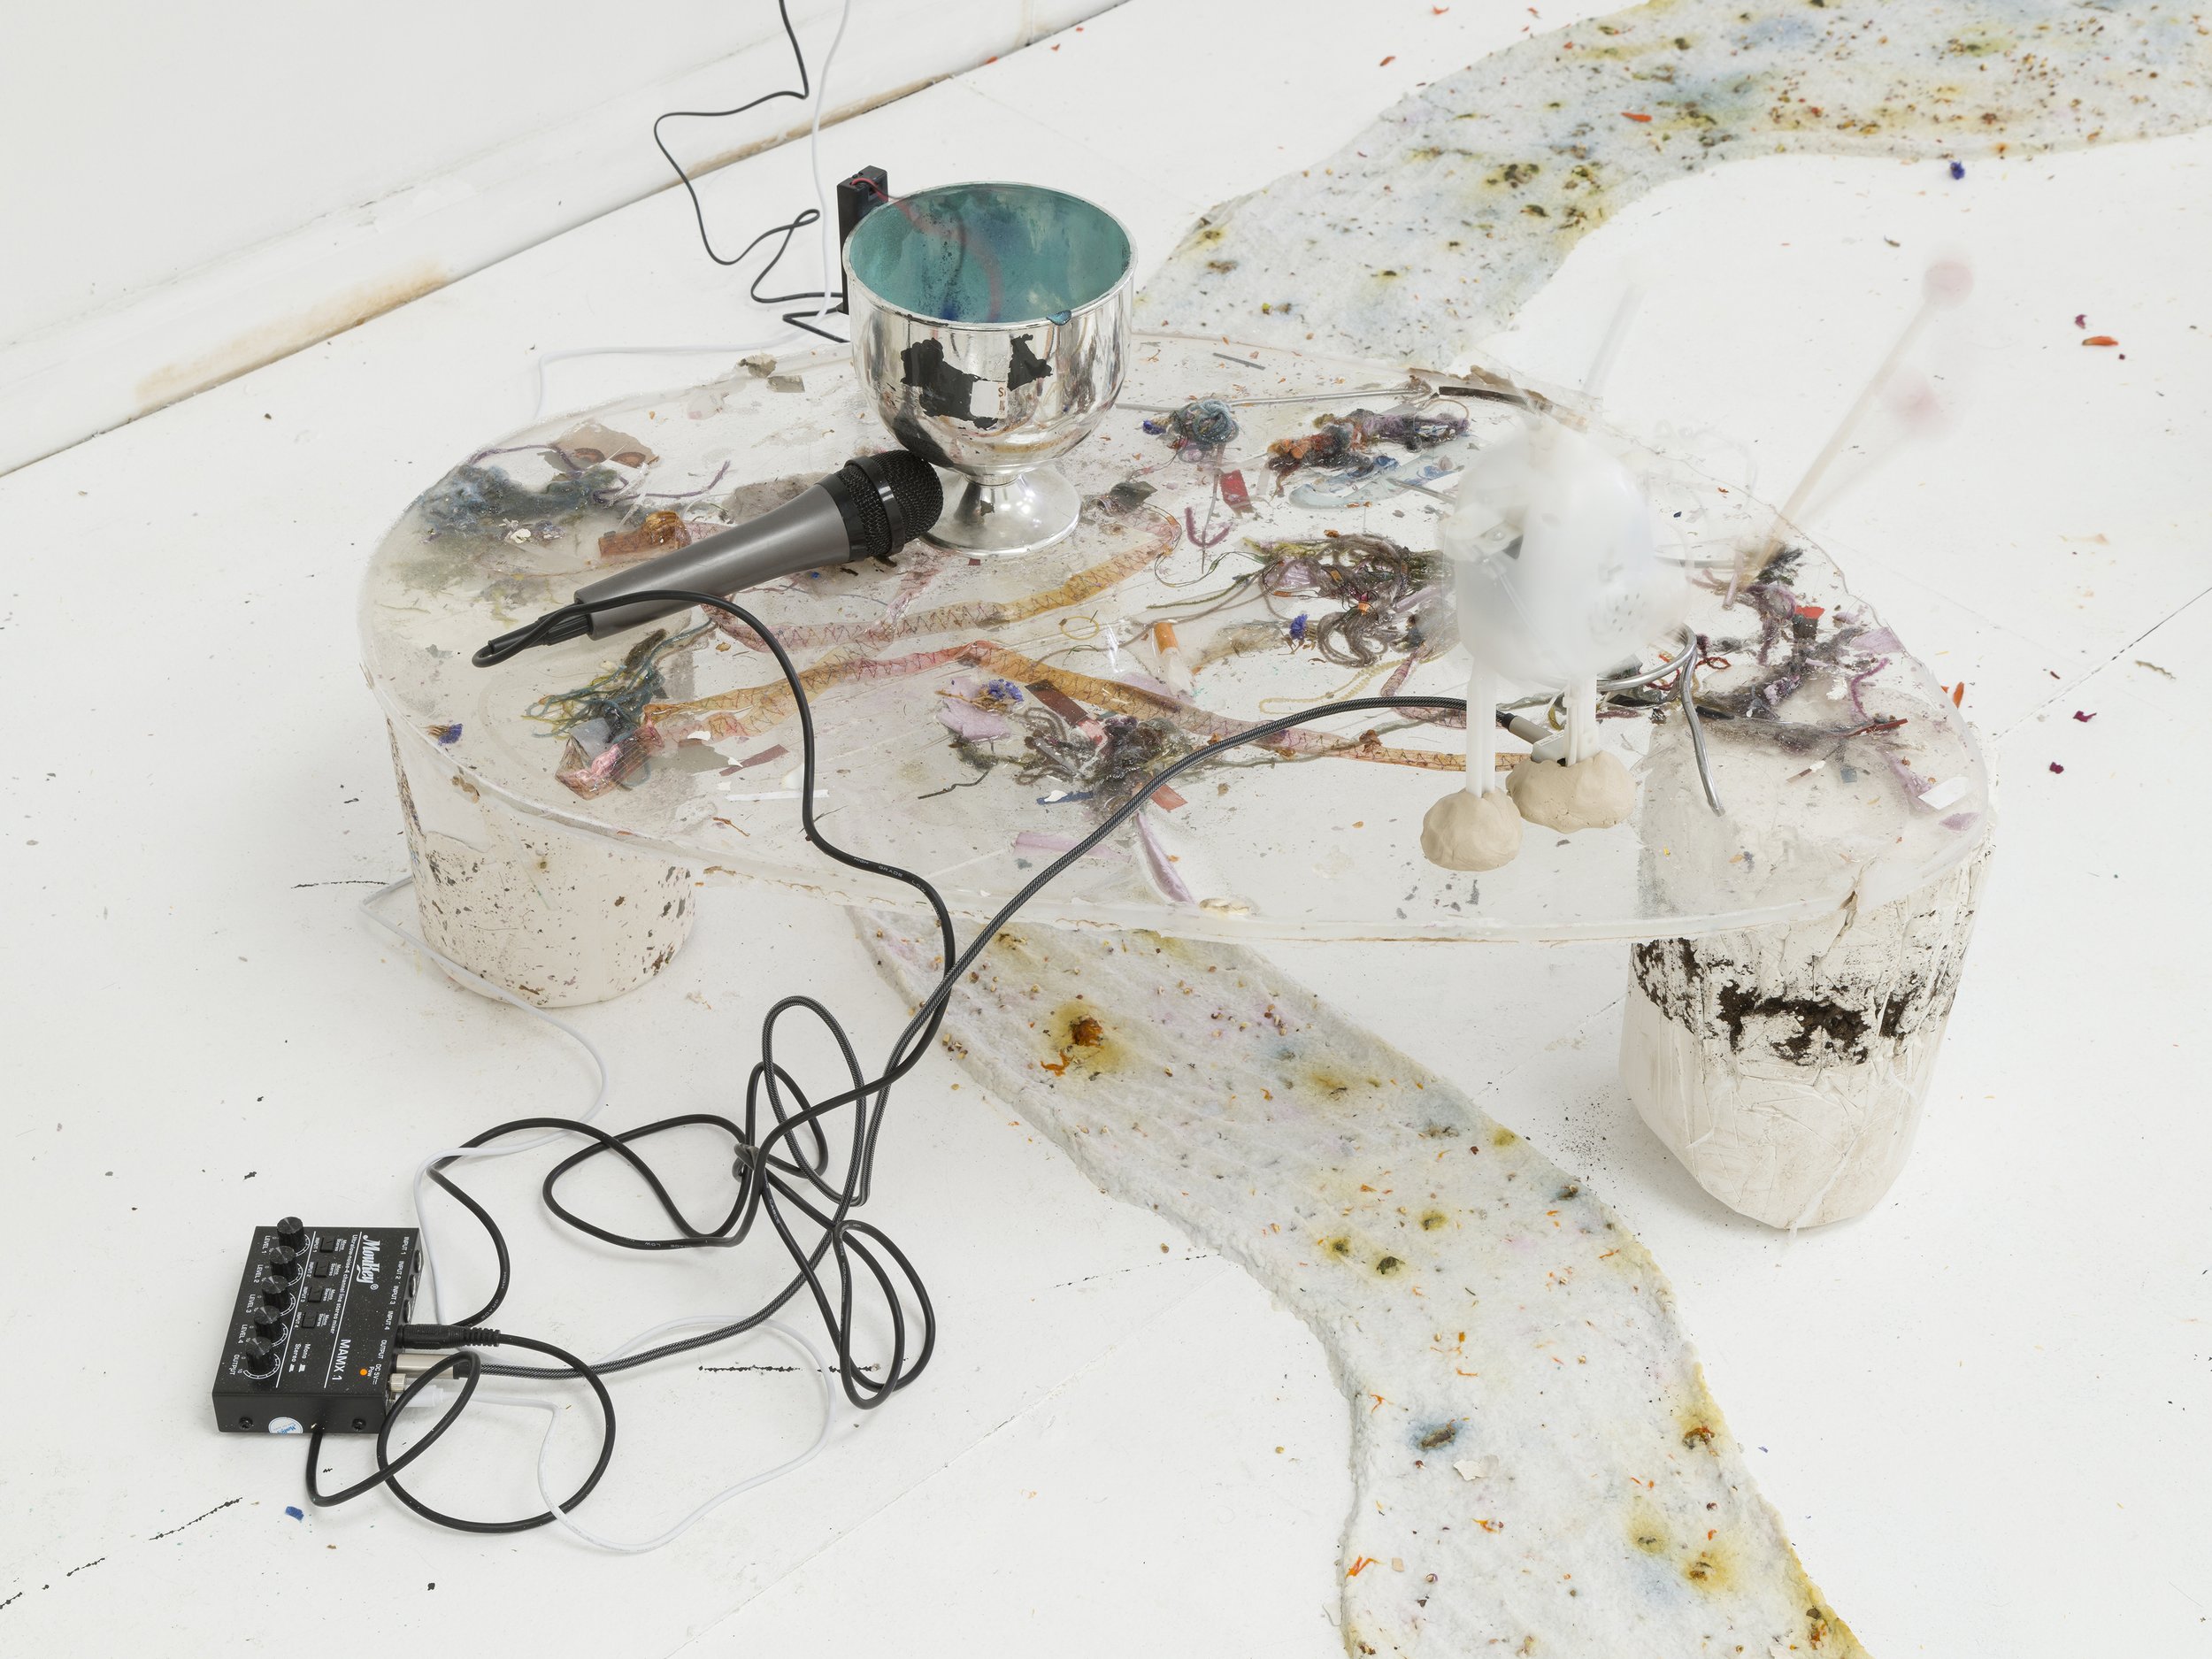   Duet Dance,  2022. Plaster, compost soil, amplifier, microphone, dancing toy, bell, vibrating motor, mica powder, resin, air dry clay, studio debris. 19.5 x 29 x 18.8 inches. 